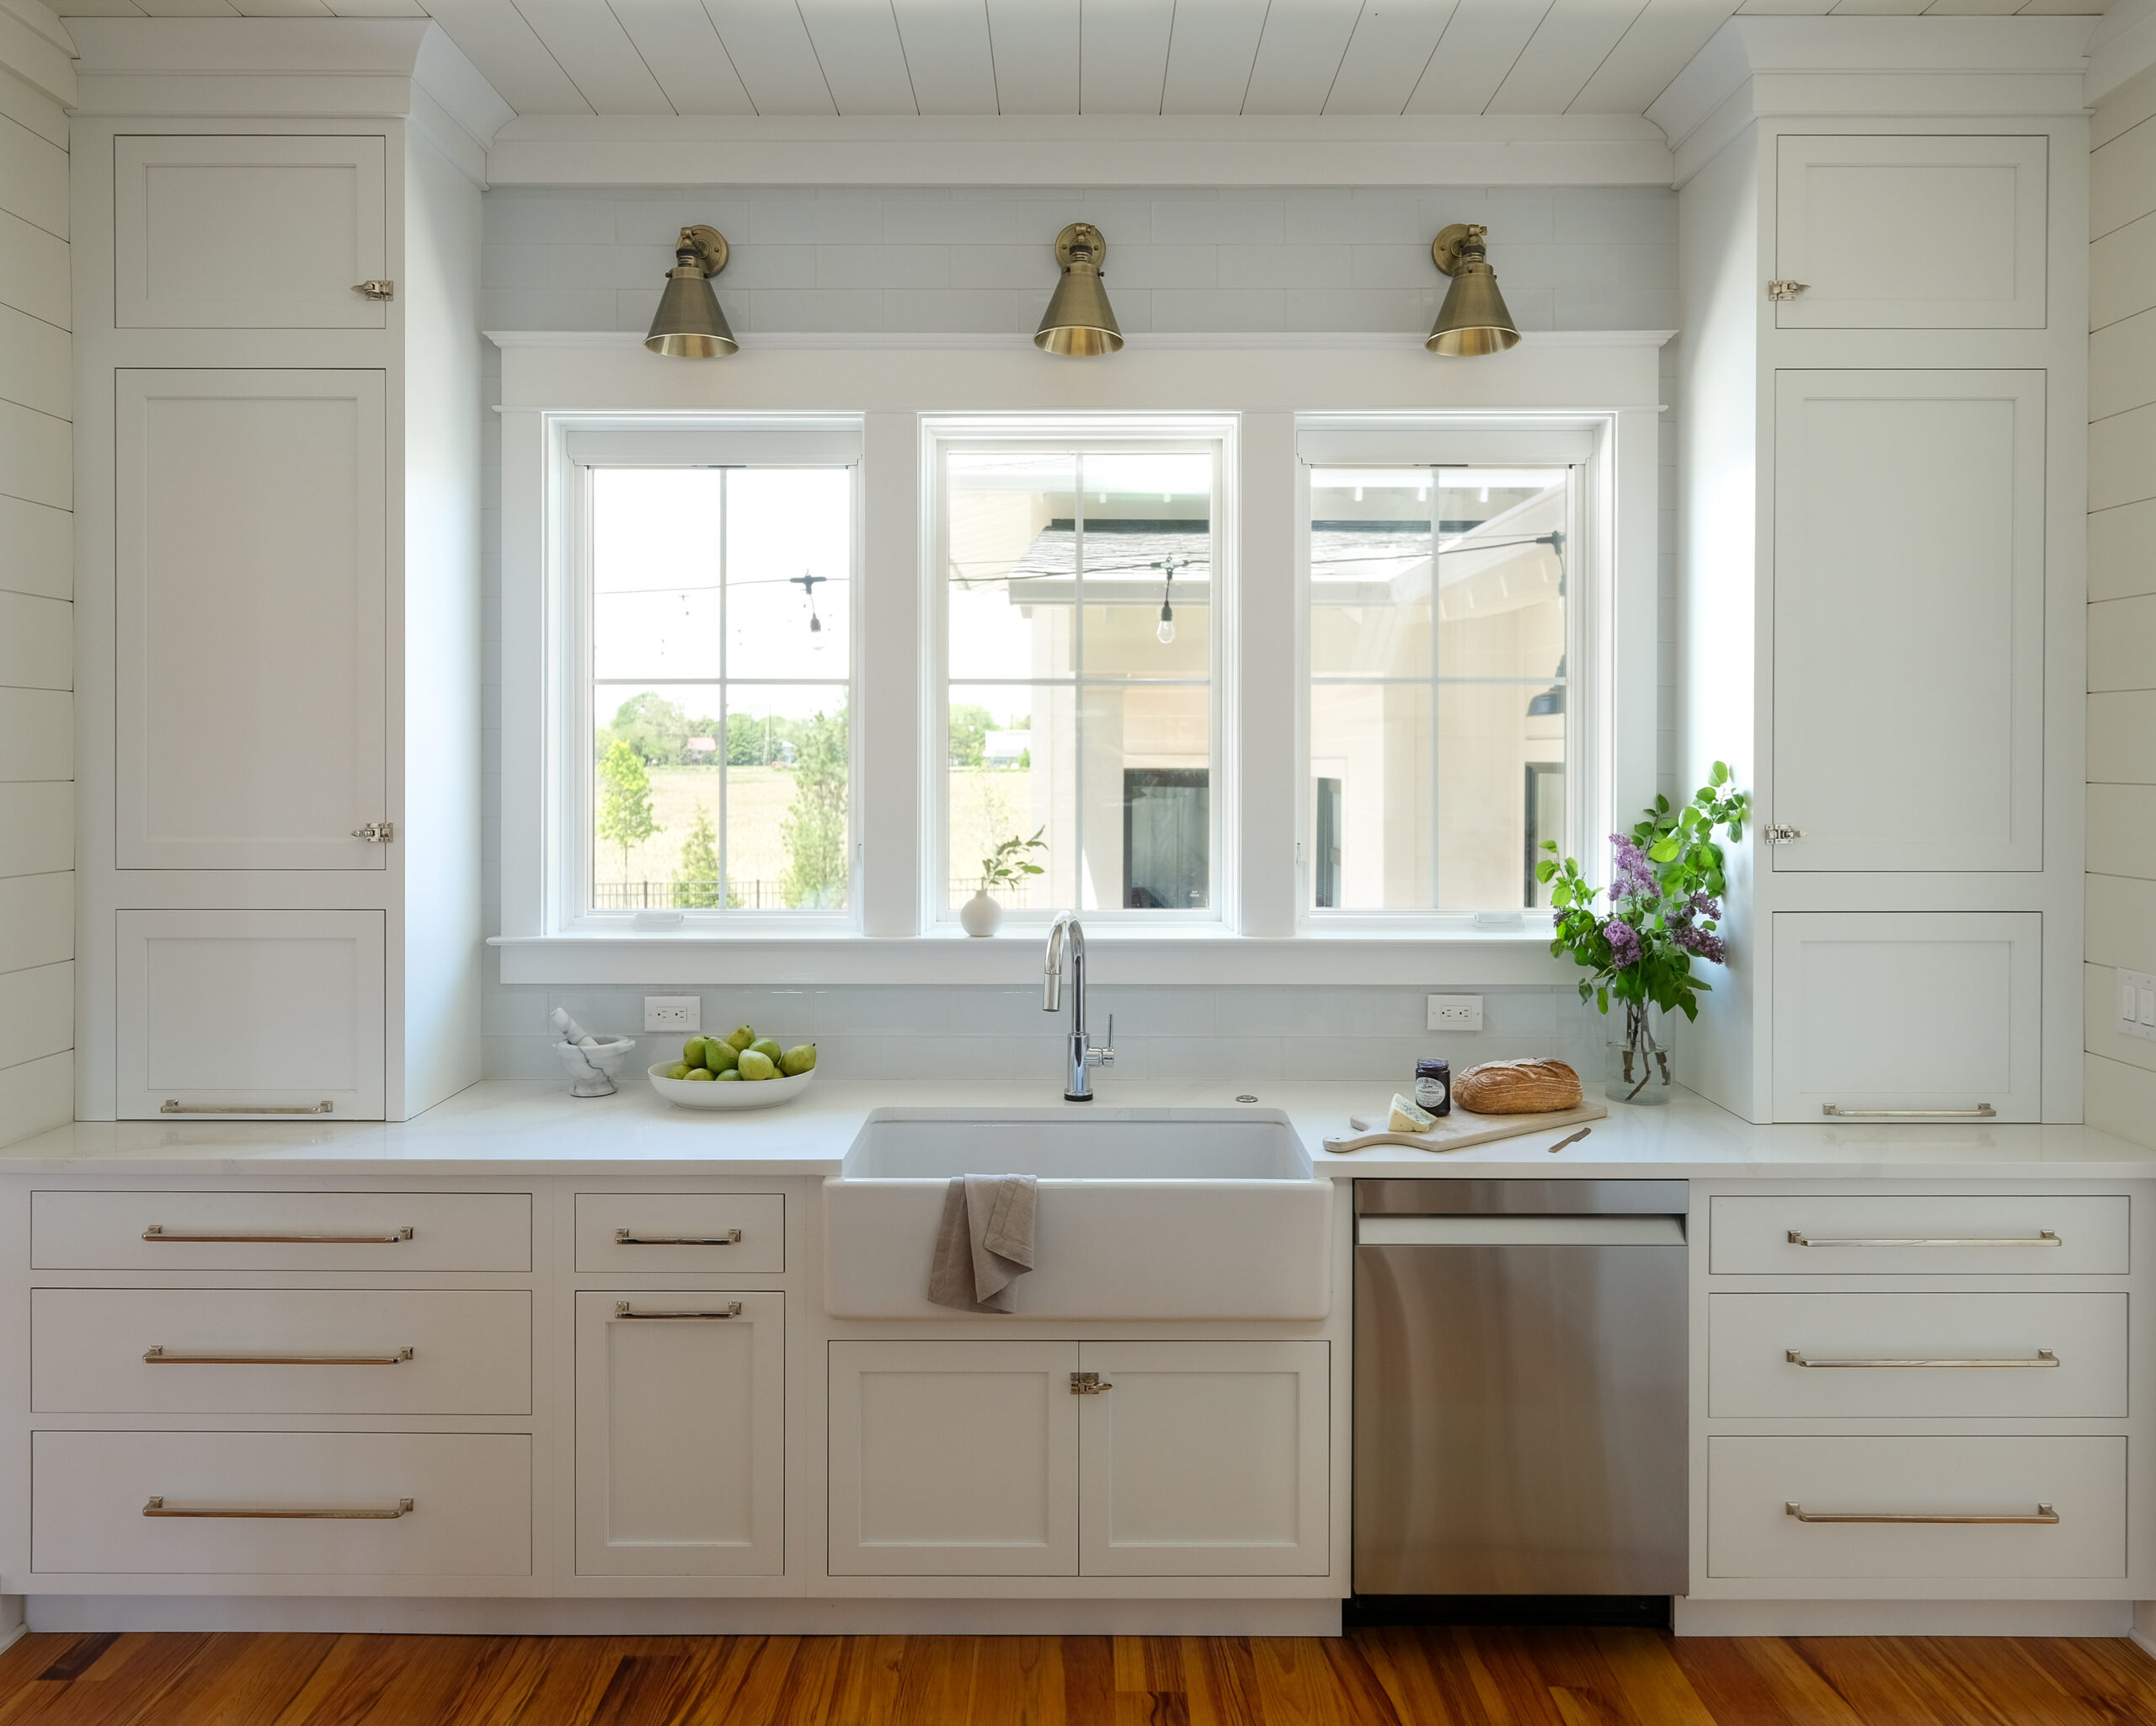 6 Window Kitchen Ideas to Spice Up Your Home